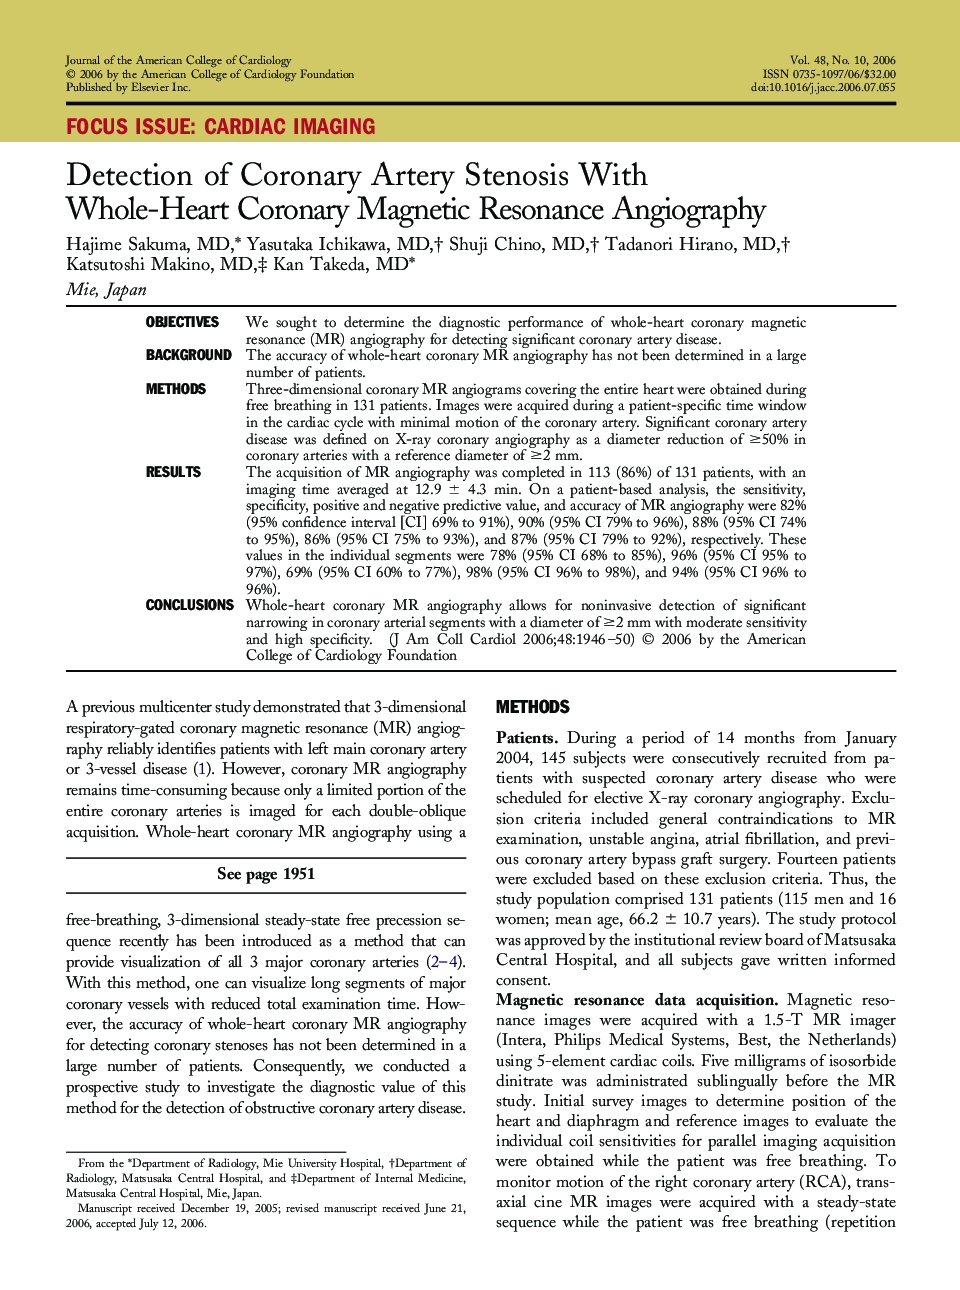 Detection of Coronary Artery Stenosis With Whole-Heart Coronary Magnetic Resonance Angiography